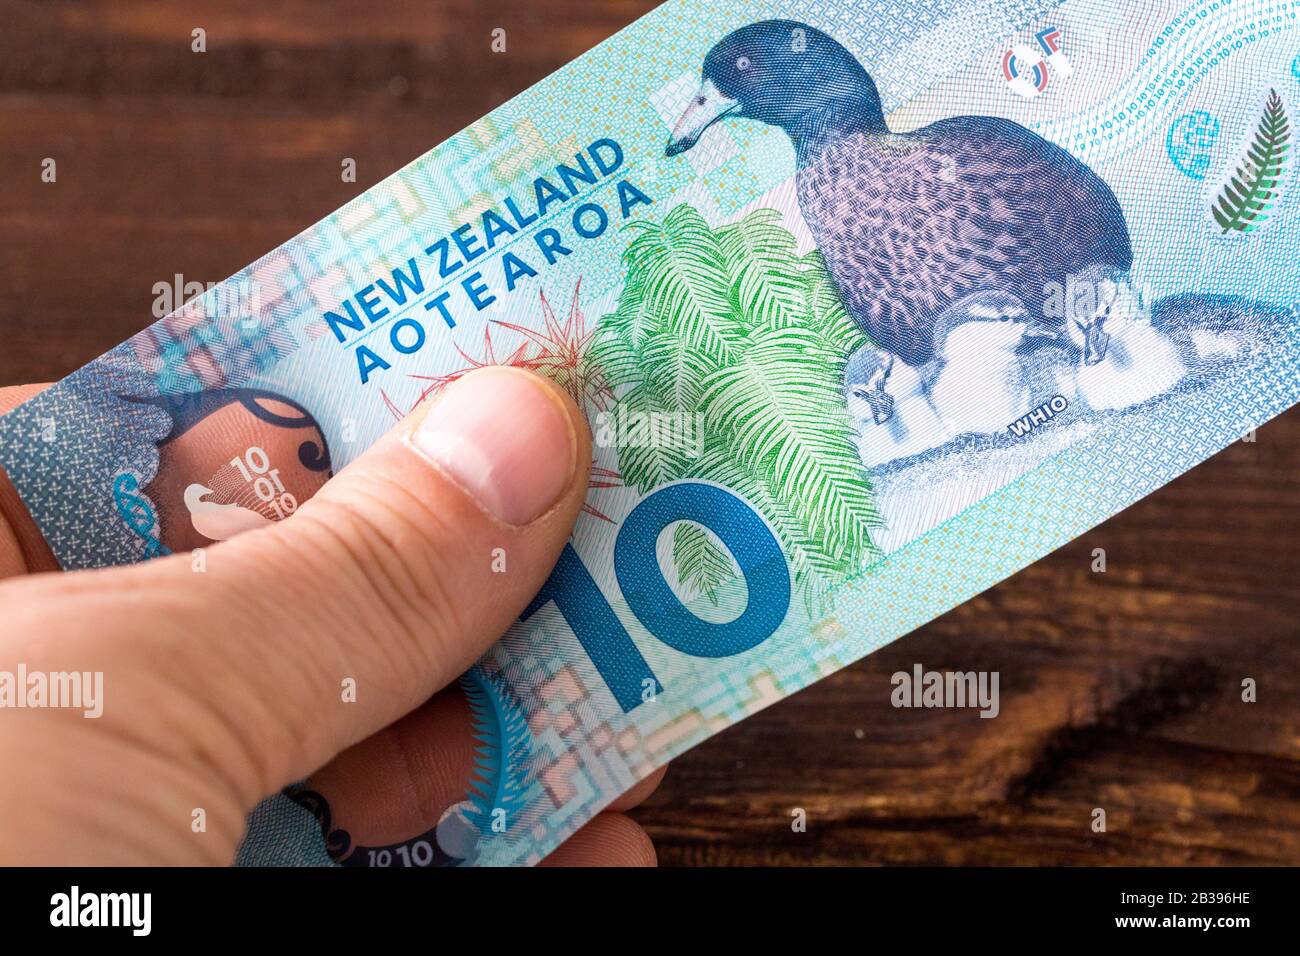 New Zealand 10 dollar banknote in hand Stock Photo